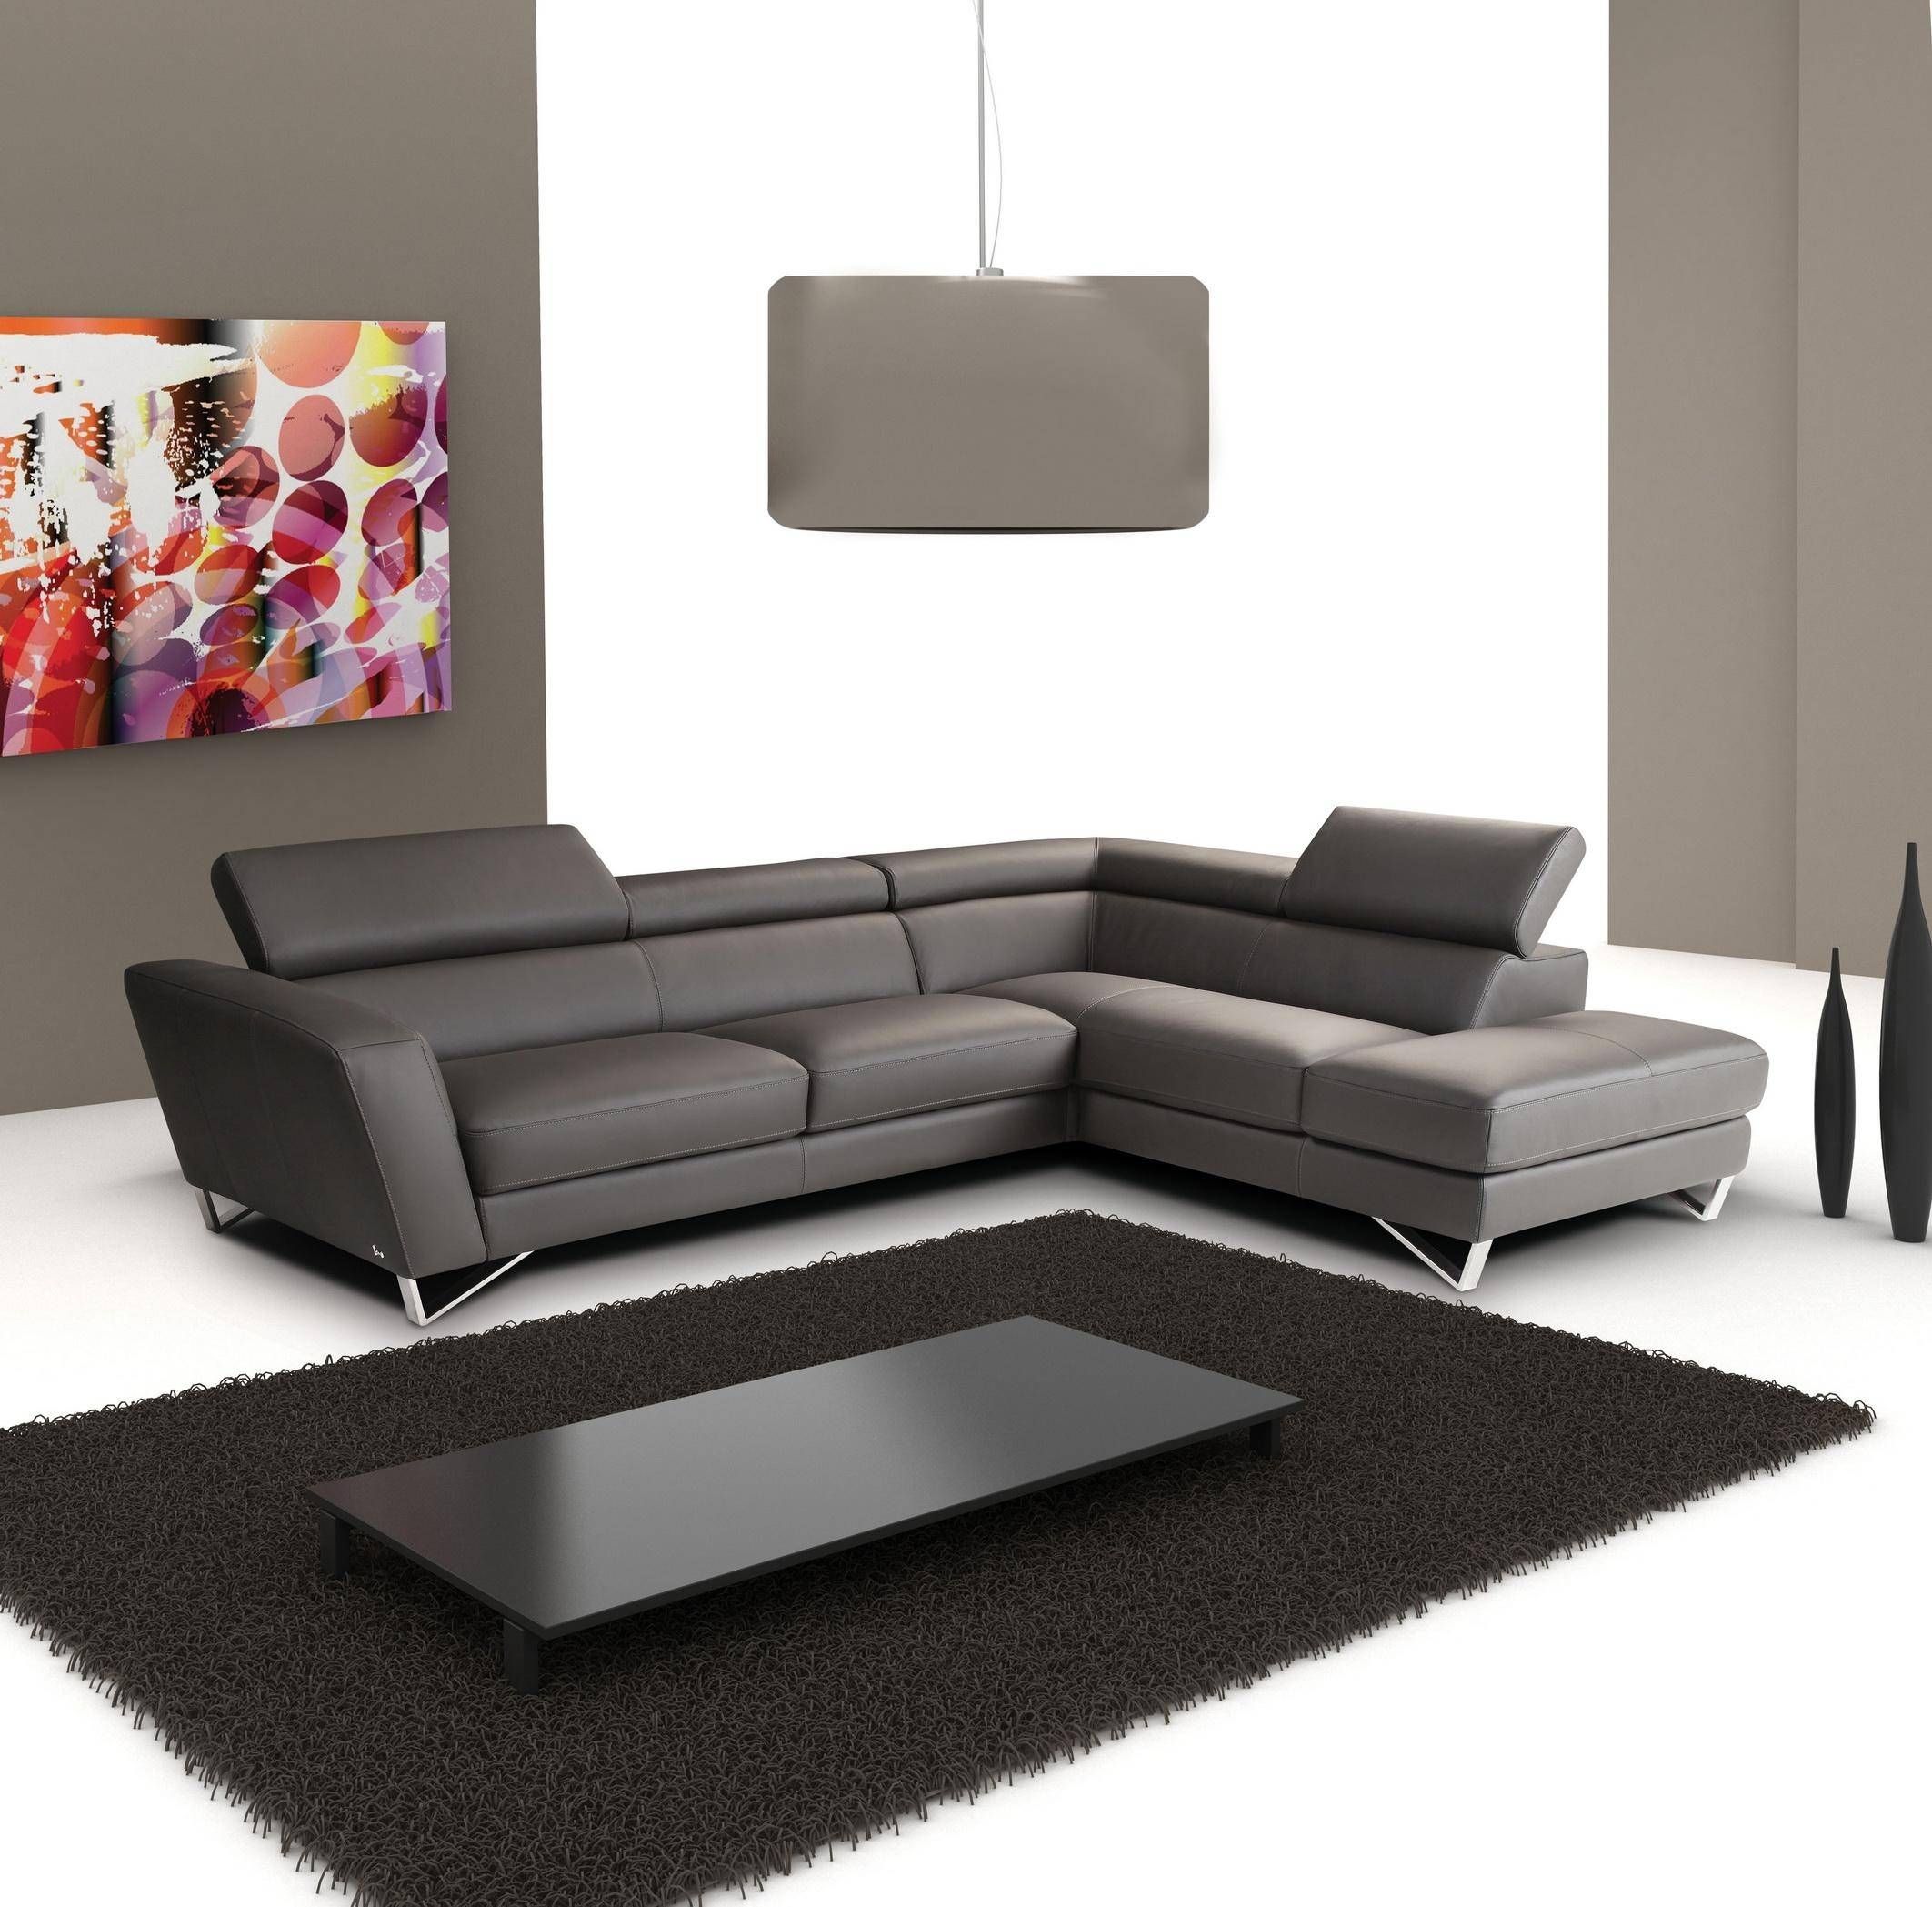 20 Choices Of Small Scale Leather Sectional Sofas Sofa Ideas With Regard To Small Scale Leather Sectional Sofas 